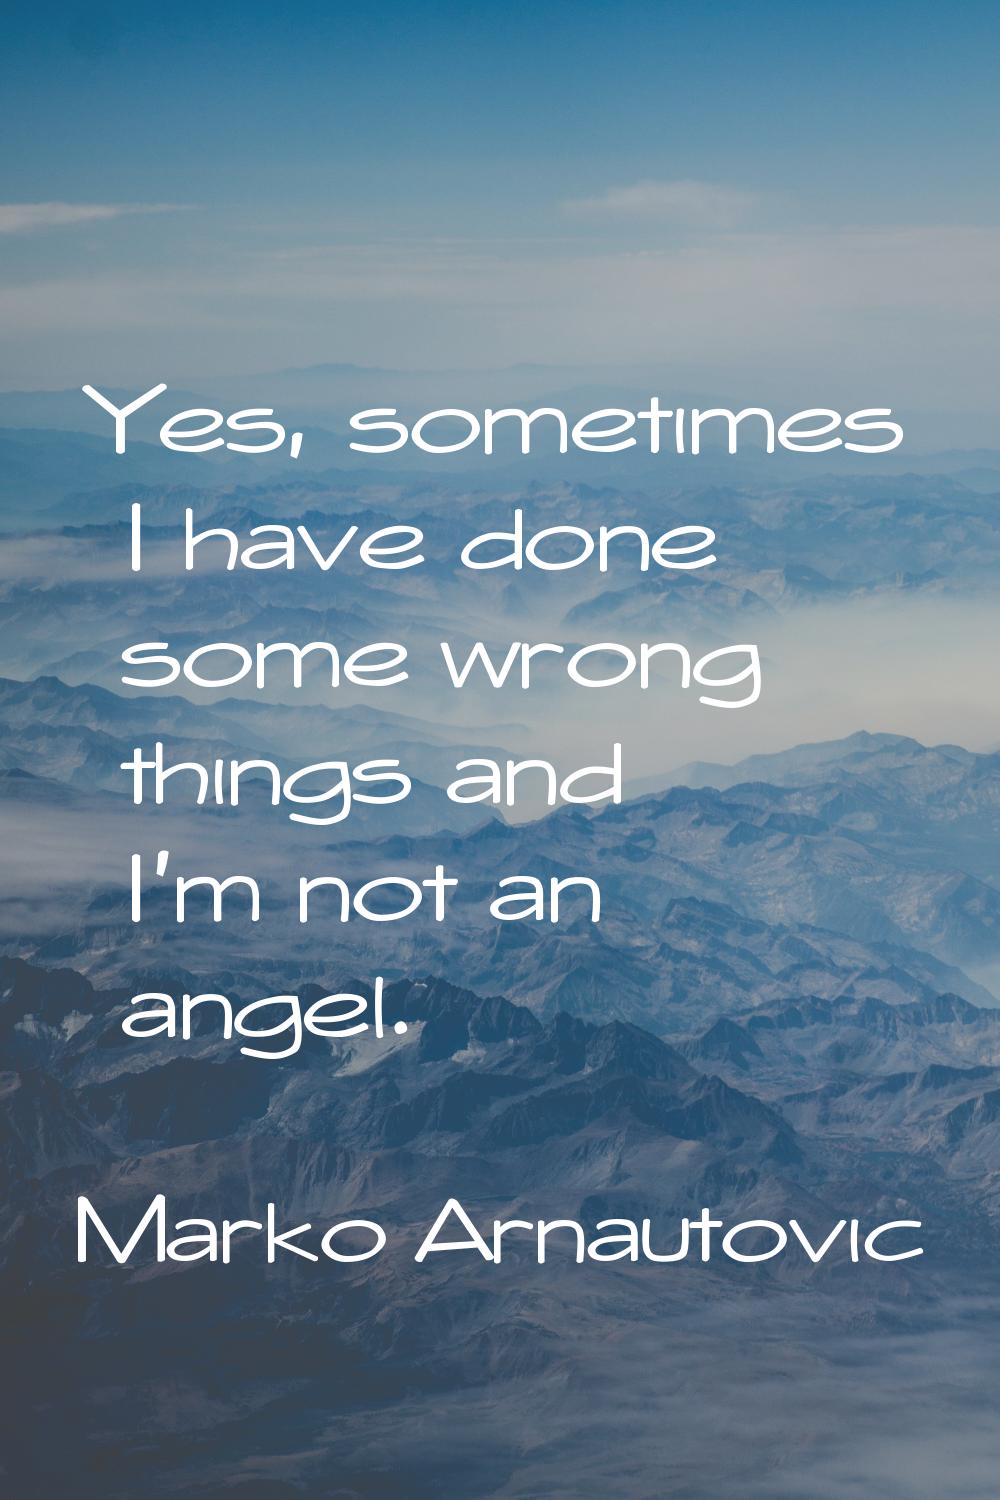 Yes, sometimes I have done some wrong things and I'm not an angel.